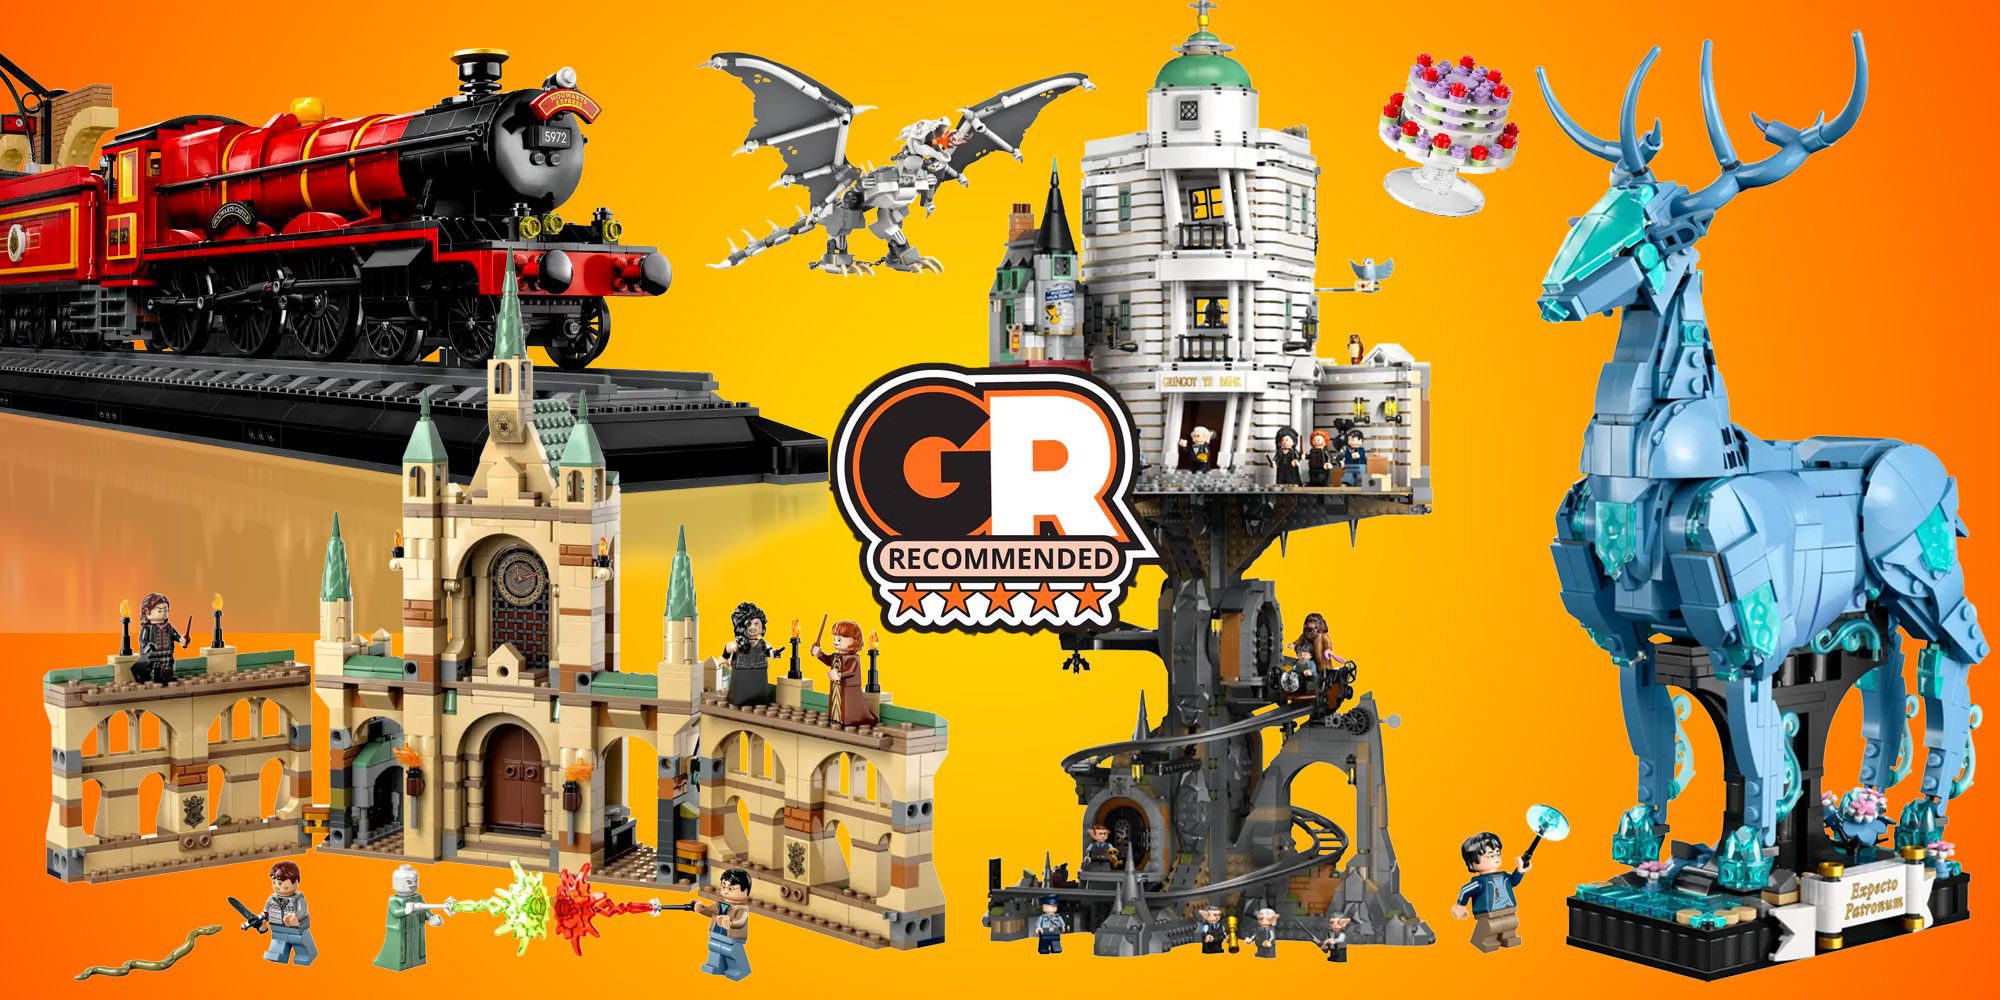 Harry Potter LEGO feature image